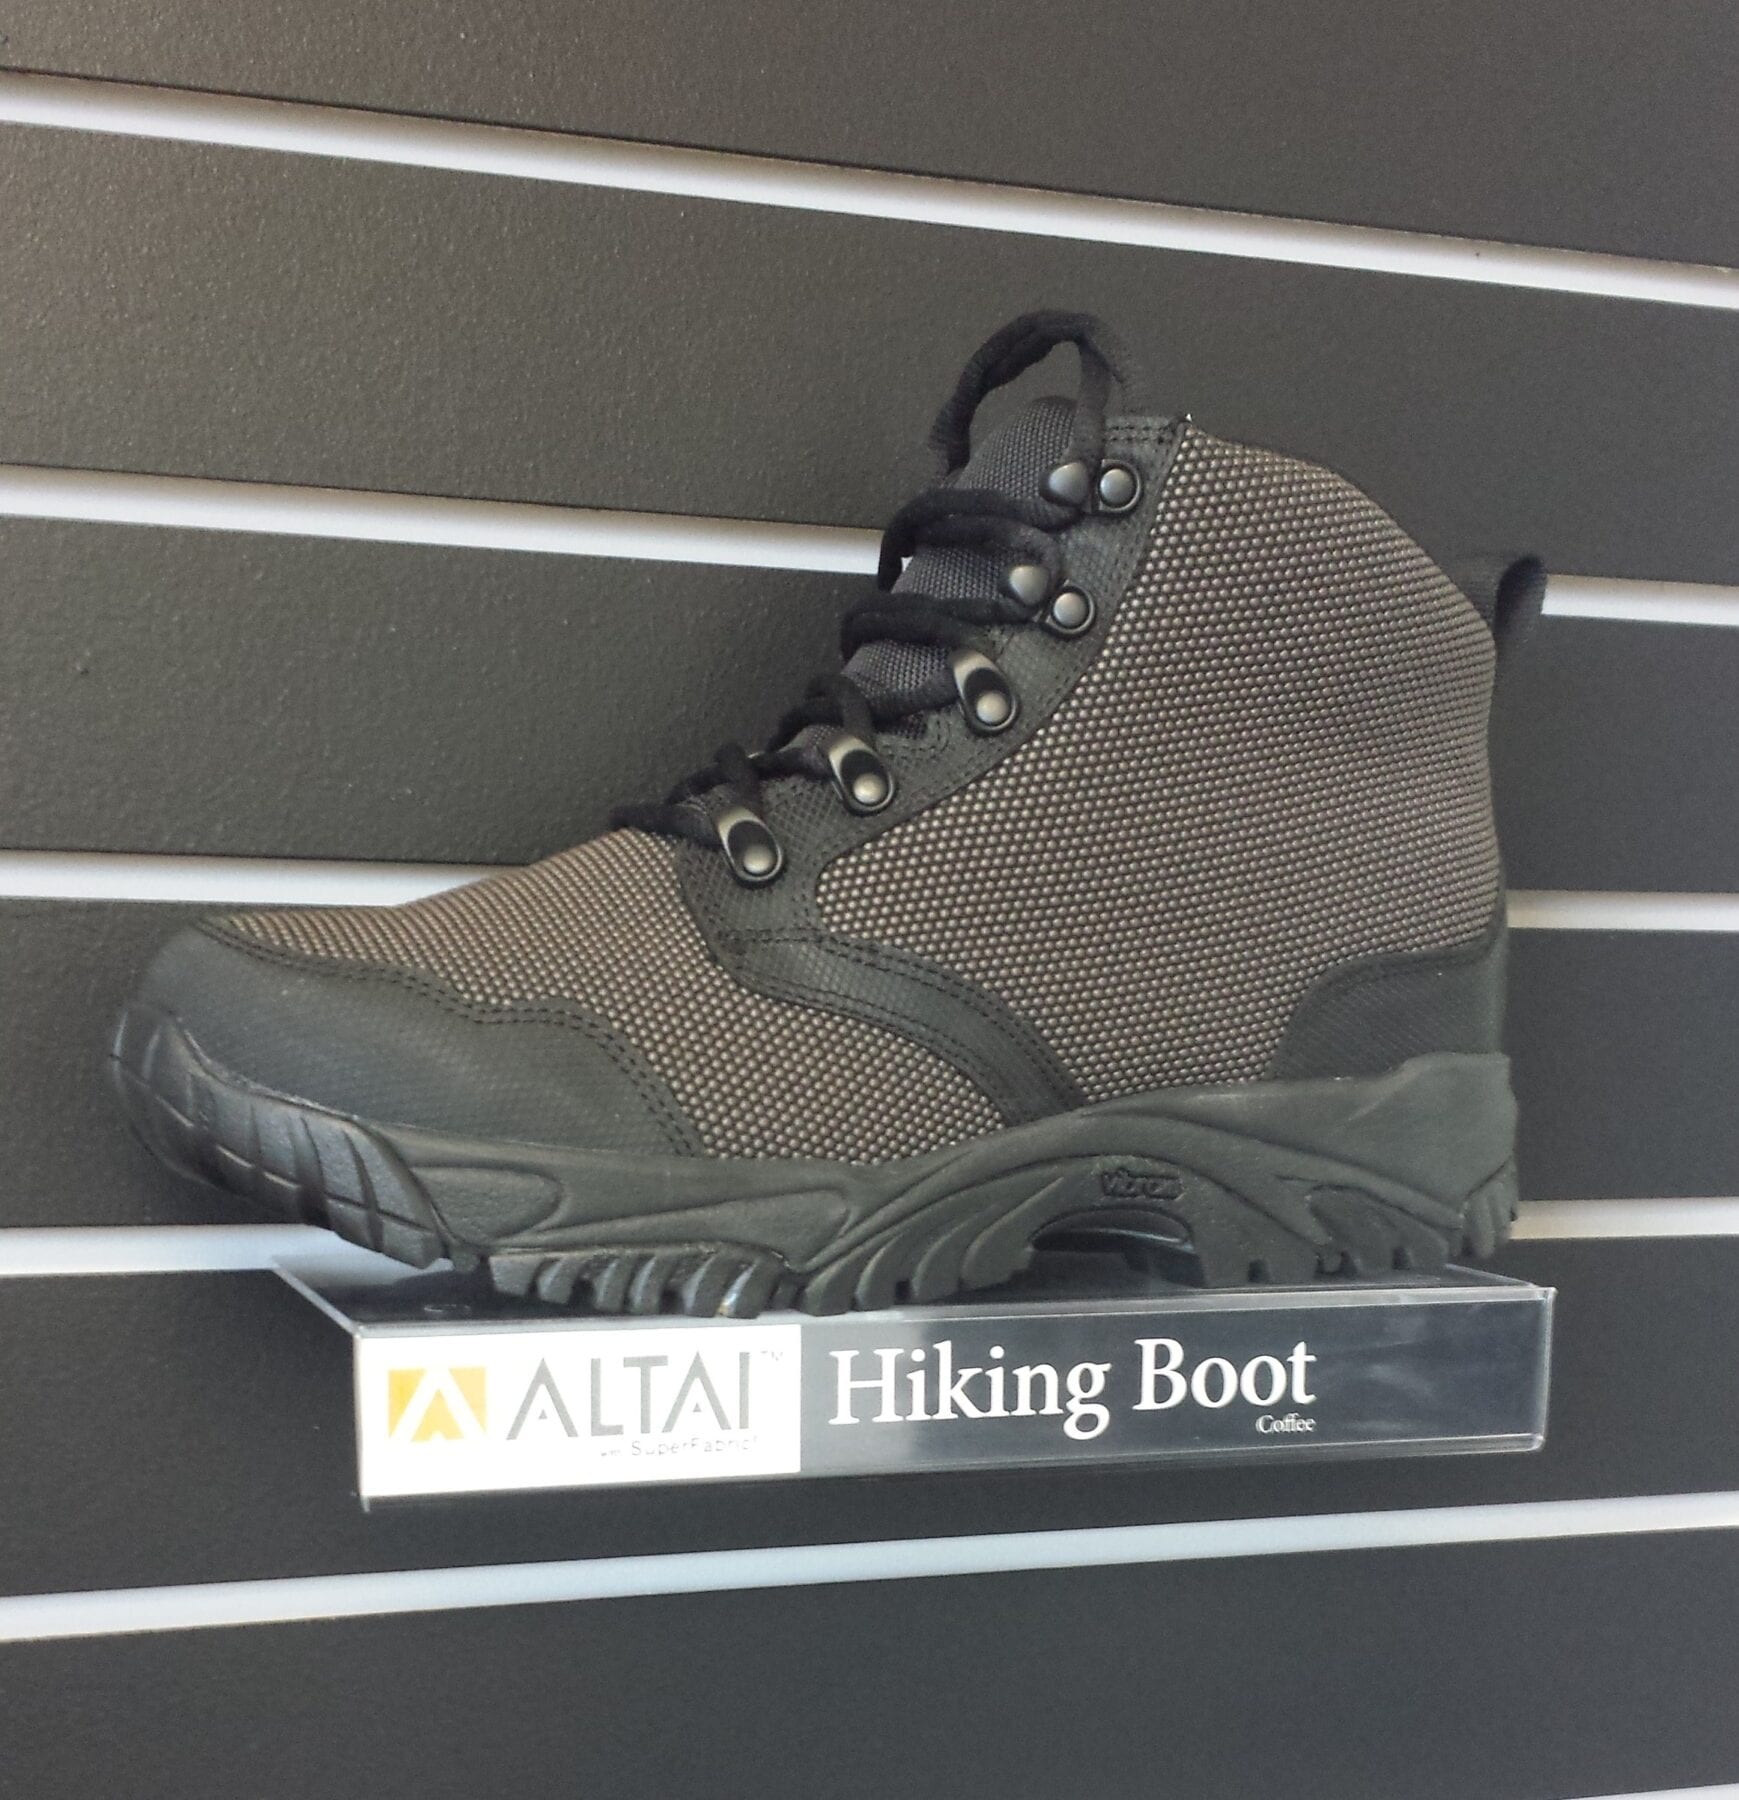 Quality Hiking Boot